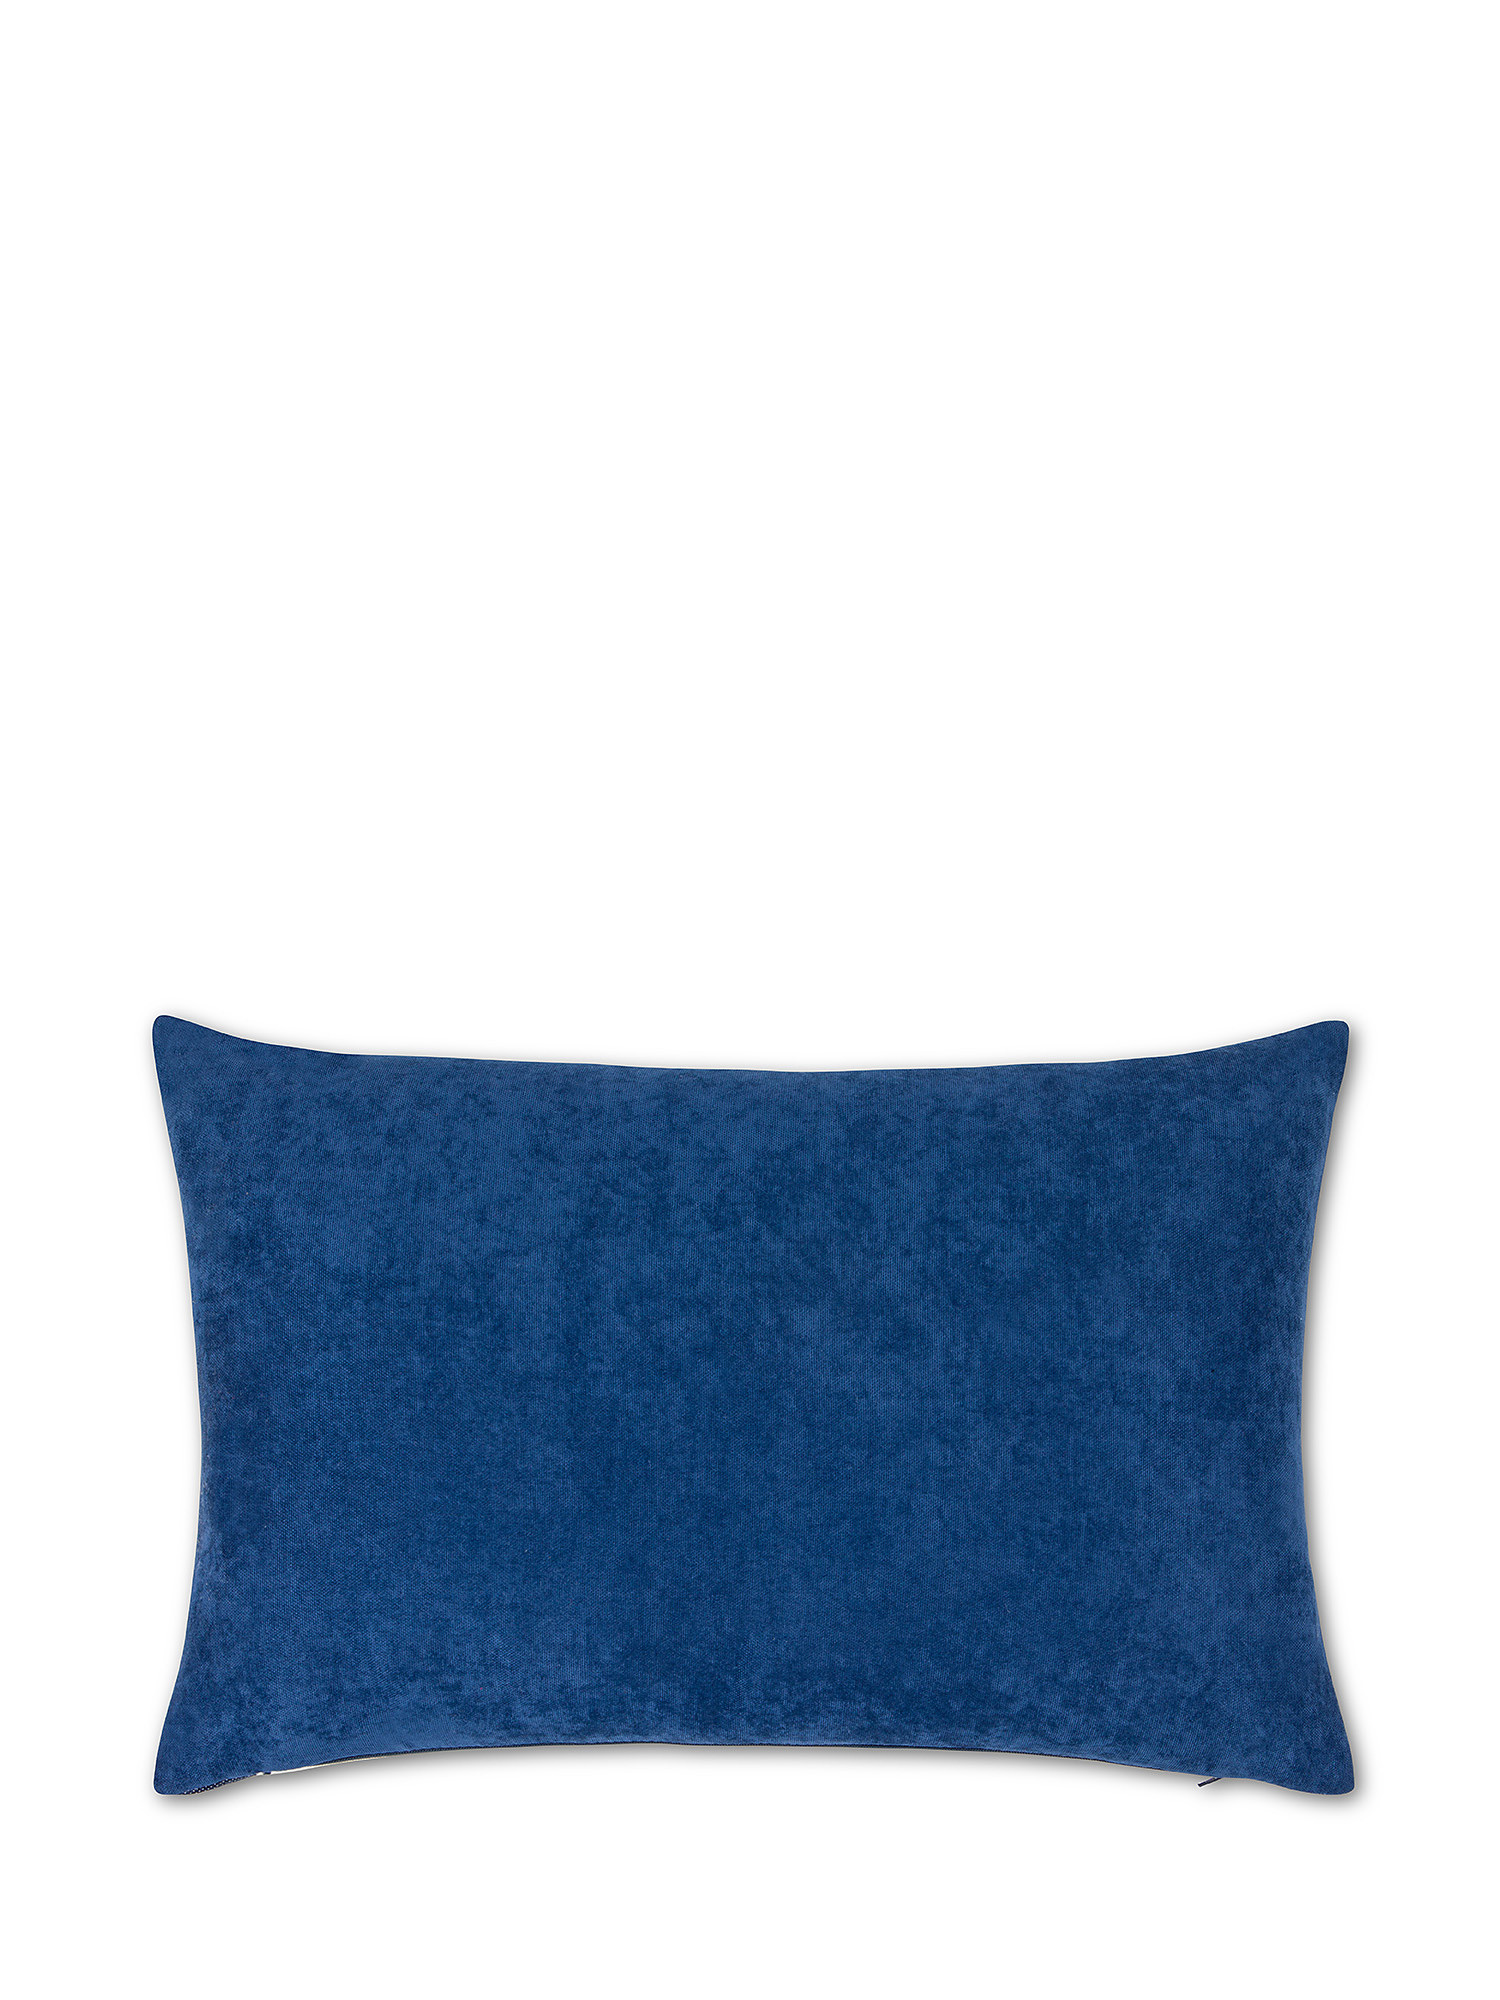 35x55 cm cushion in cotton and linen, White / Blue, large image number 1